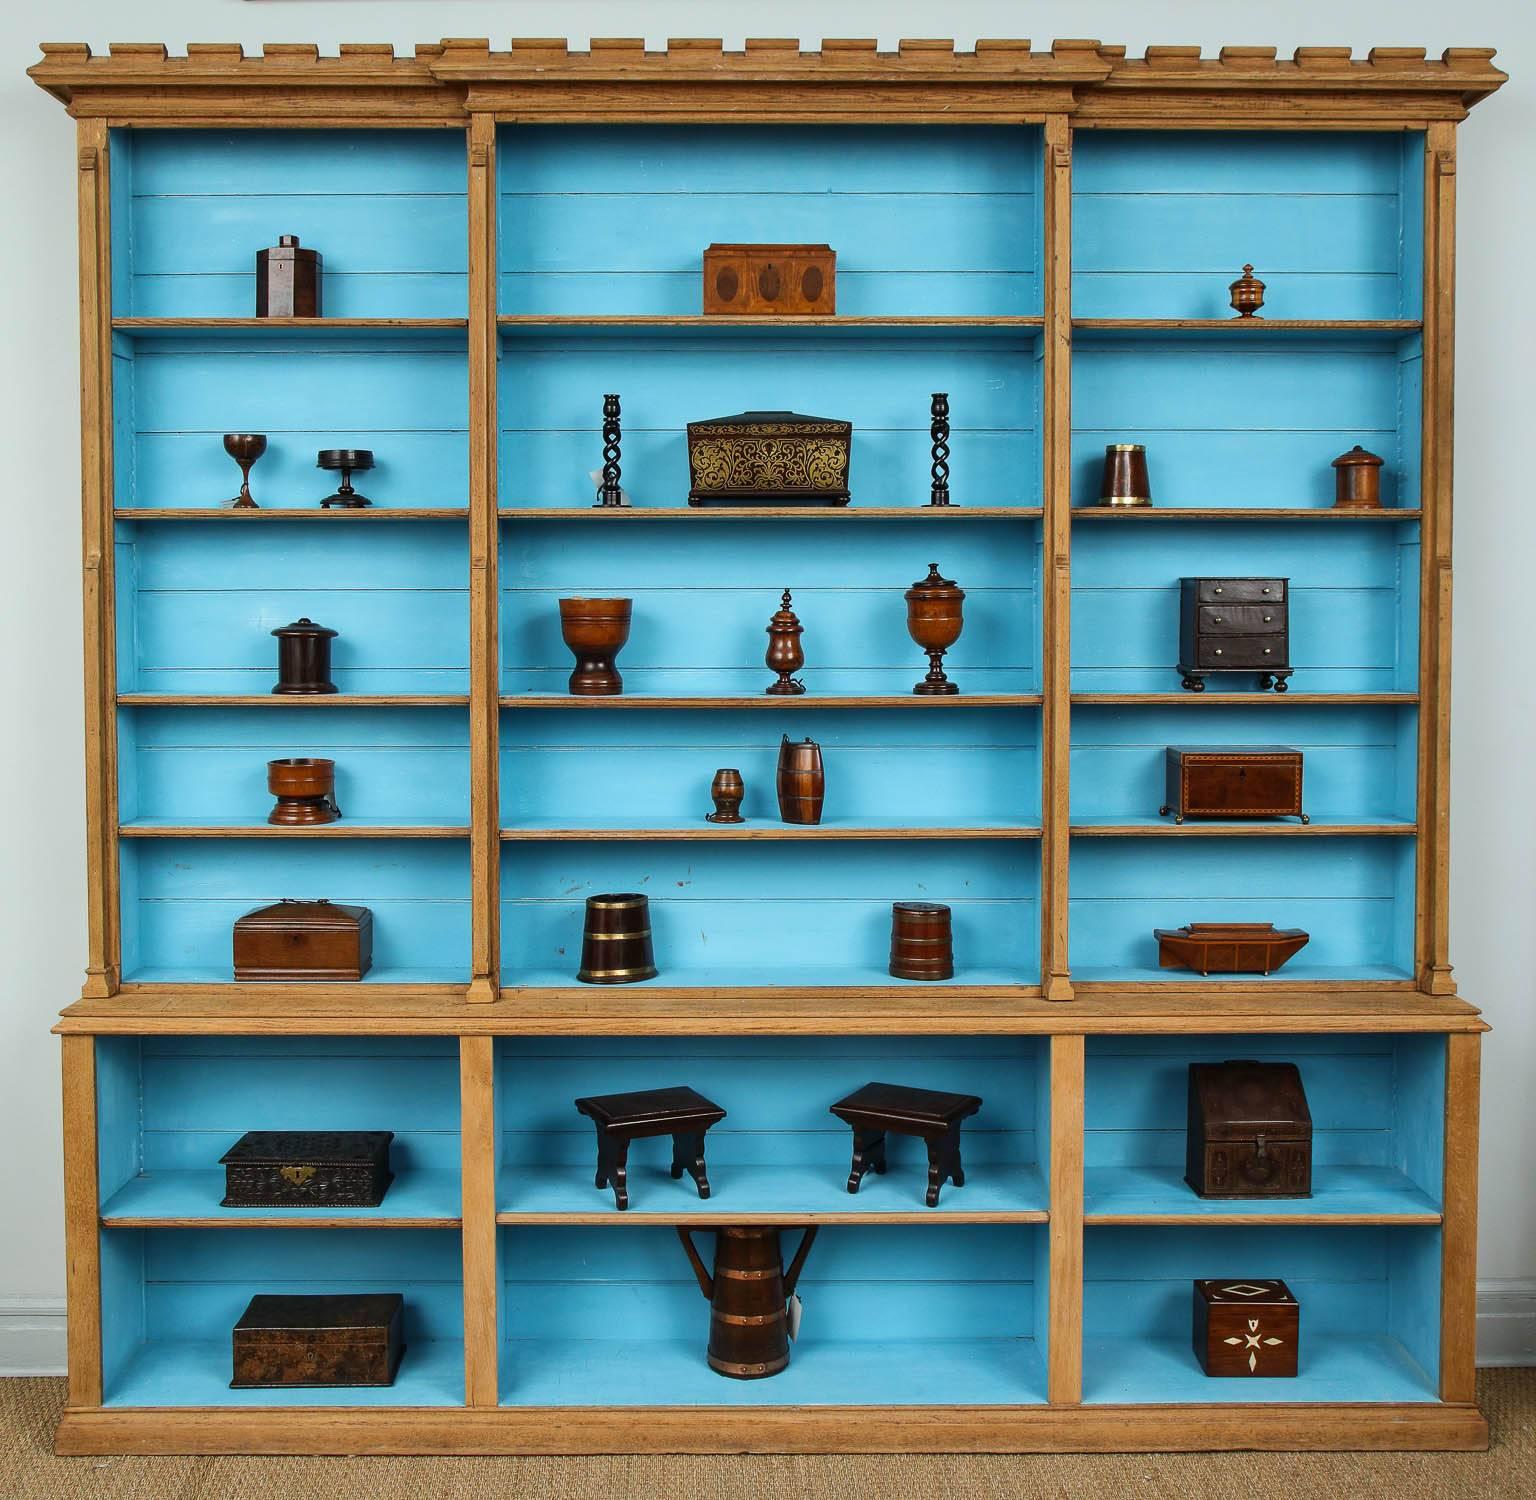 Very good 19th century English oak library bookcase, now with stripped surface and blue painted interior having crenellated cornice, with both upper and lower sections with adjustable and fixed shelves, the original backboards with bead molded edges.